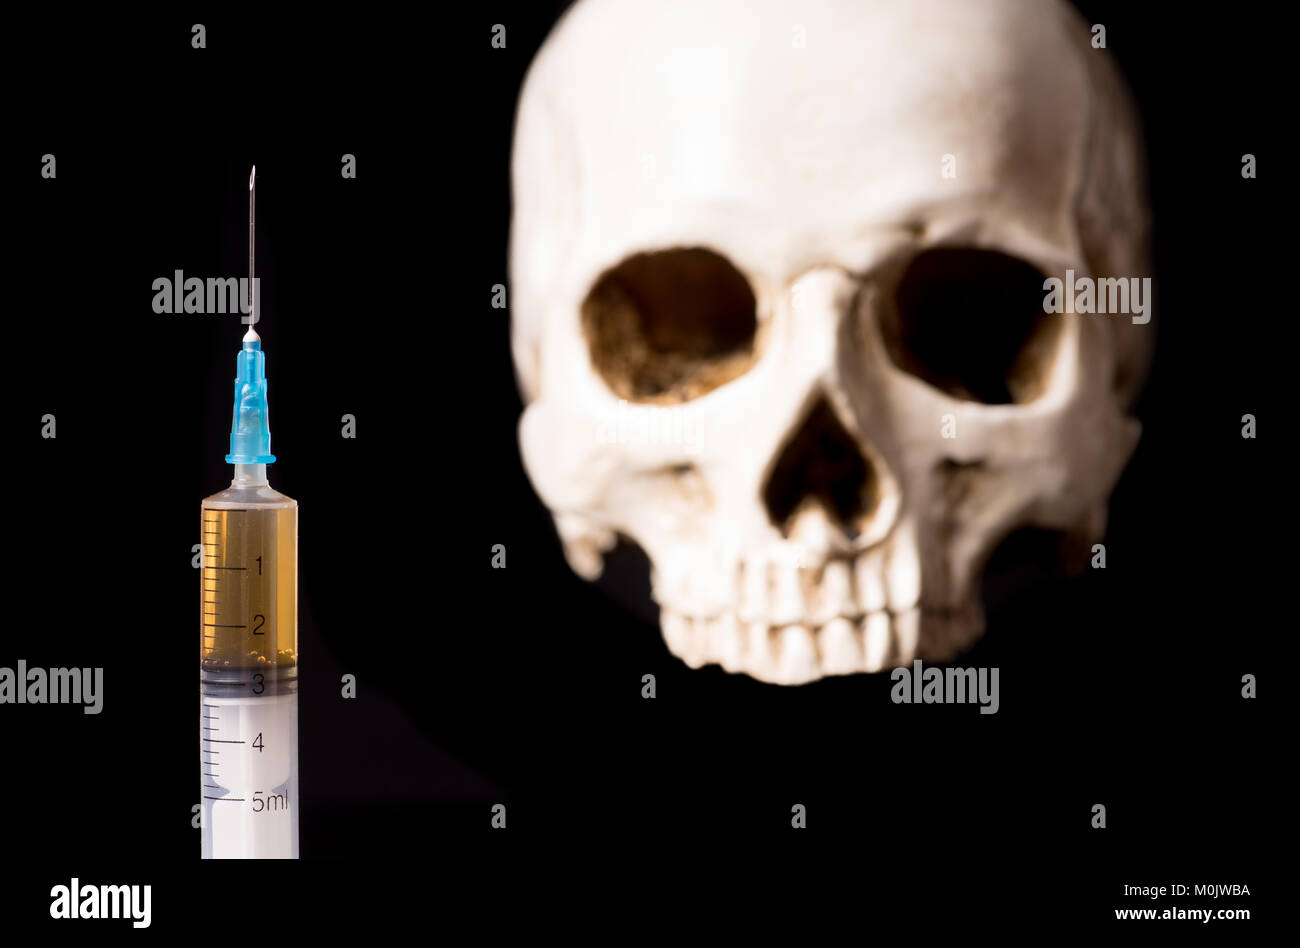 Syringe with brown liquid and blurry skull isolated on black background Stock Photo